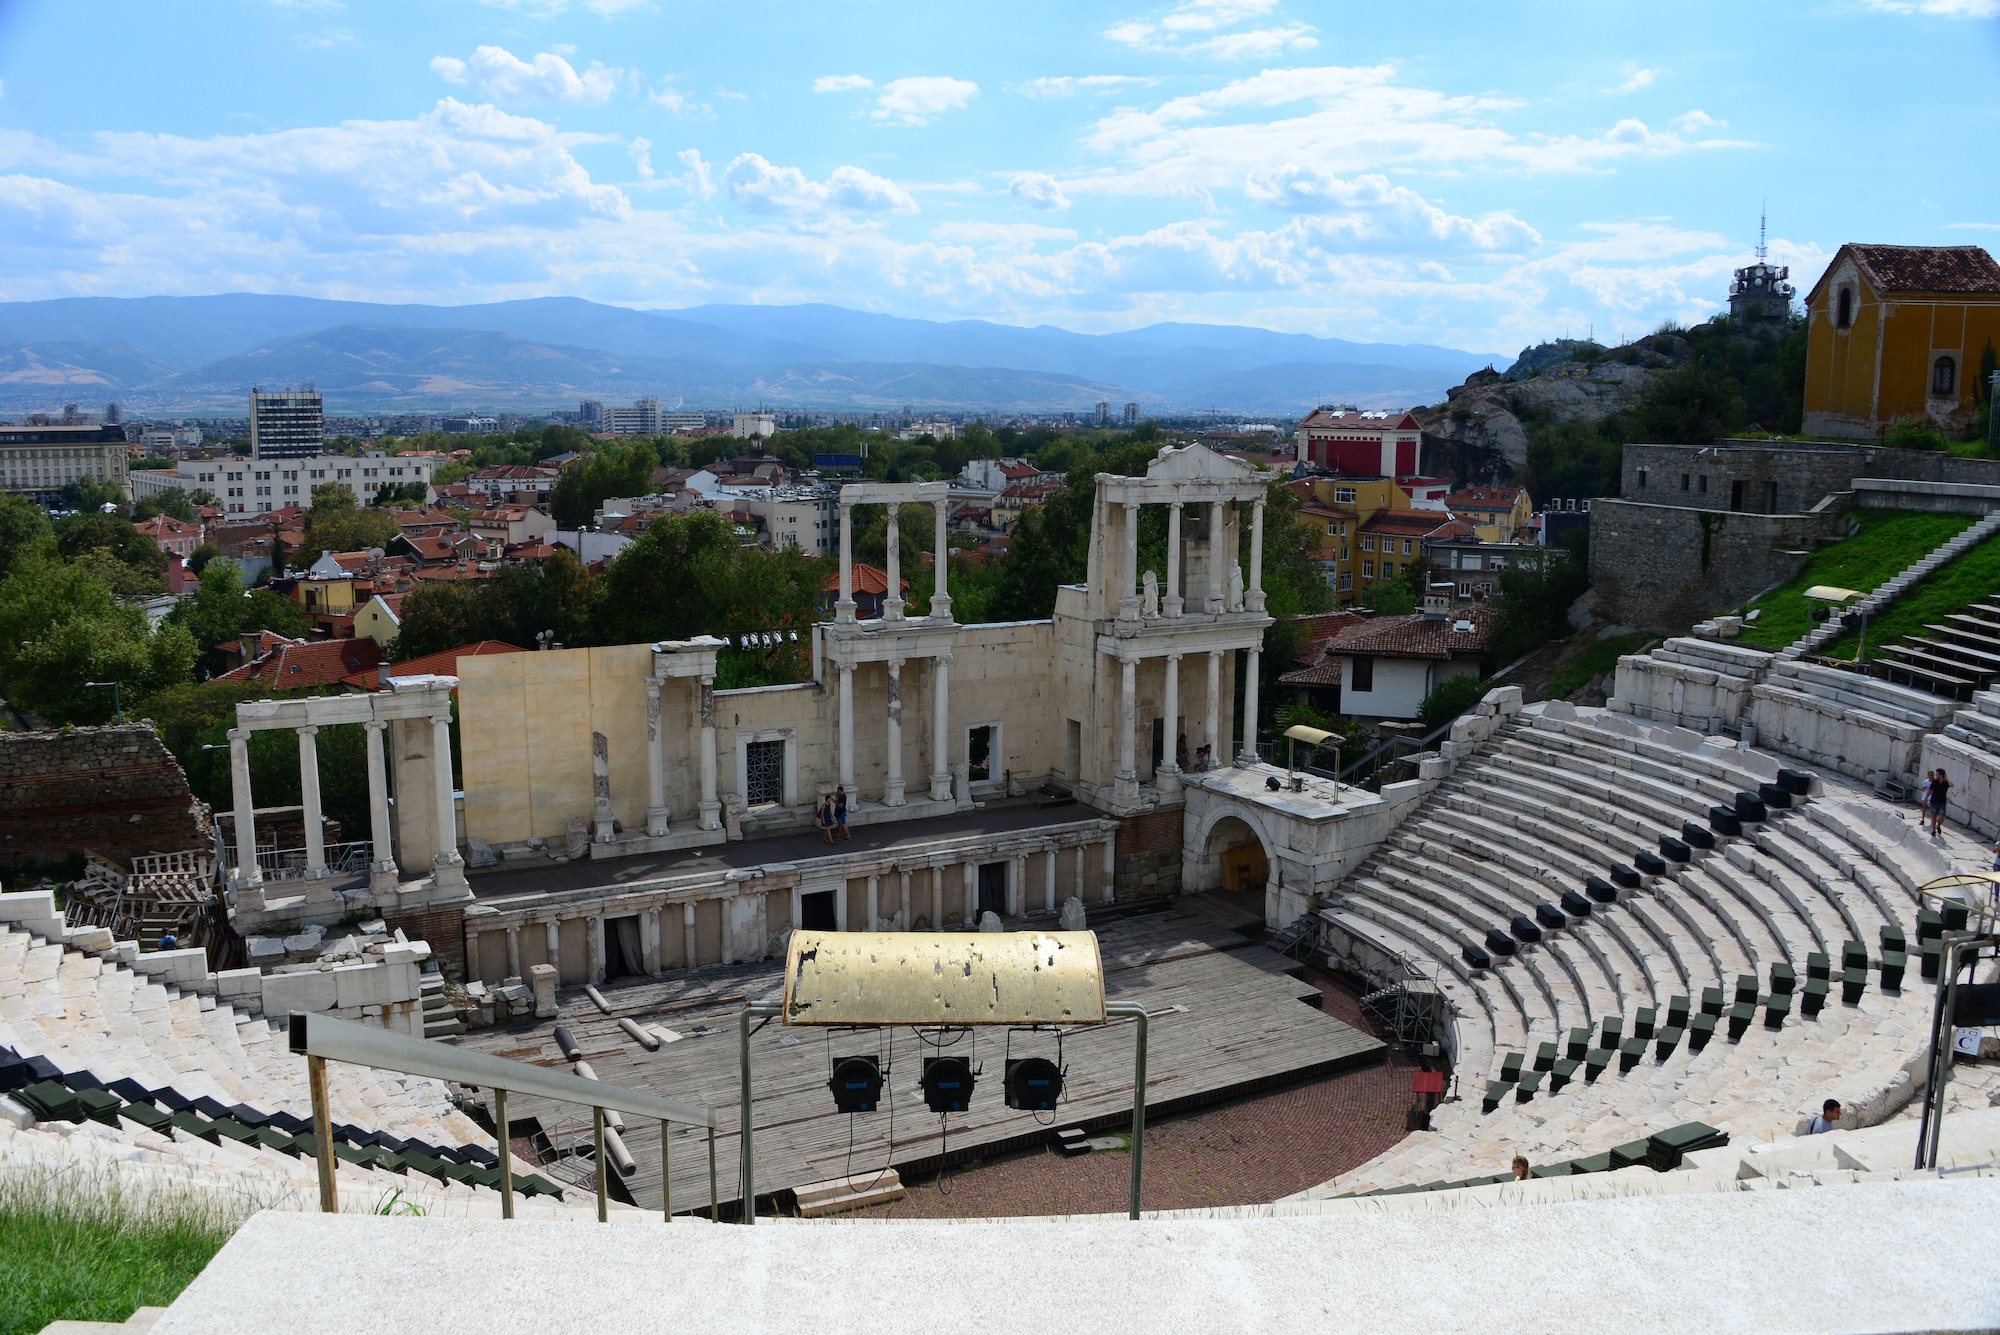 The Roman Amphitheatre located in the city center in Plovdiv, Bulgaria, is one of the most well preserved theatres from the time and is still in use today.  Tennessee National Guard Soldiers and Airmen enjoyed a Morale Wellness and Recreation visit to Plovdiv on Aug.13, 2016 while they were deployed to Novo Selo Training Area, Bulgaria to participate in Humanitarian Civic Assistance projects.    (U.S. Air National Guard photo by Master Sgt. Kendra M. Owenby, 134 ARW Public Affairs)